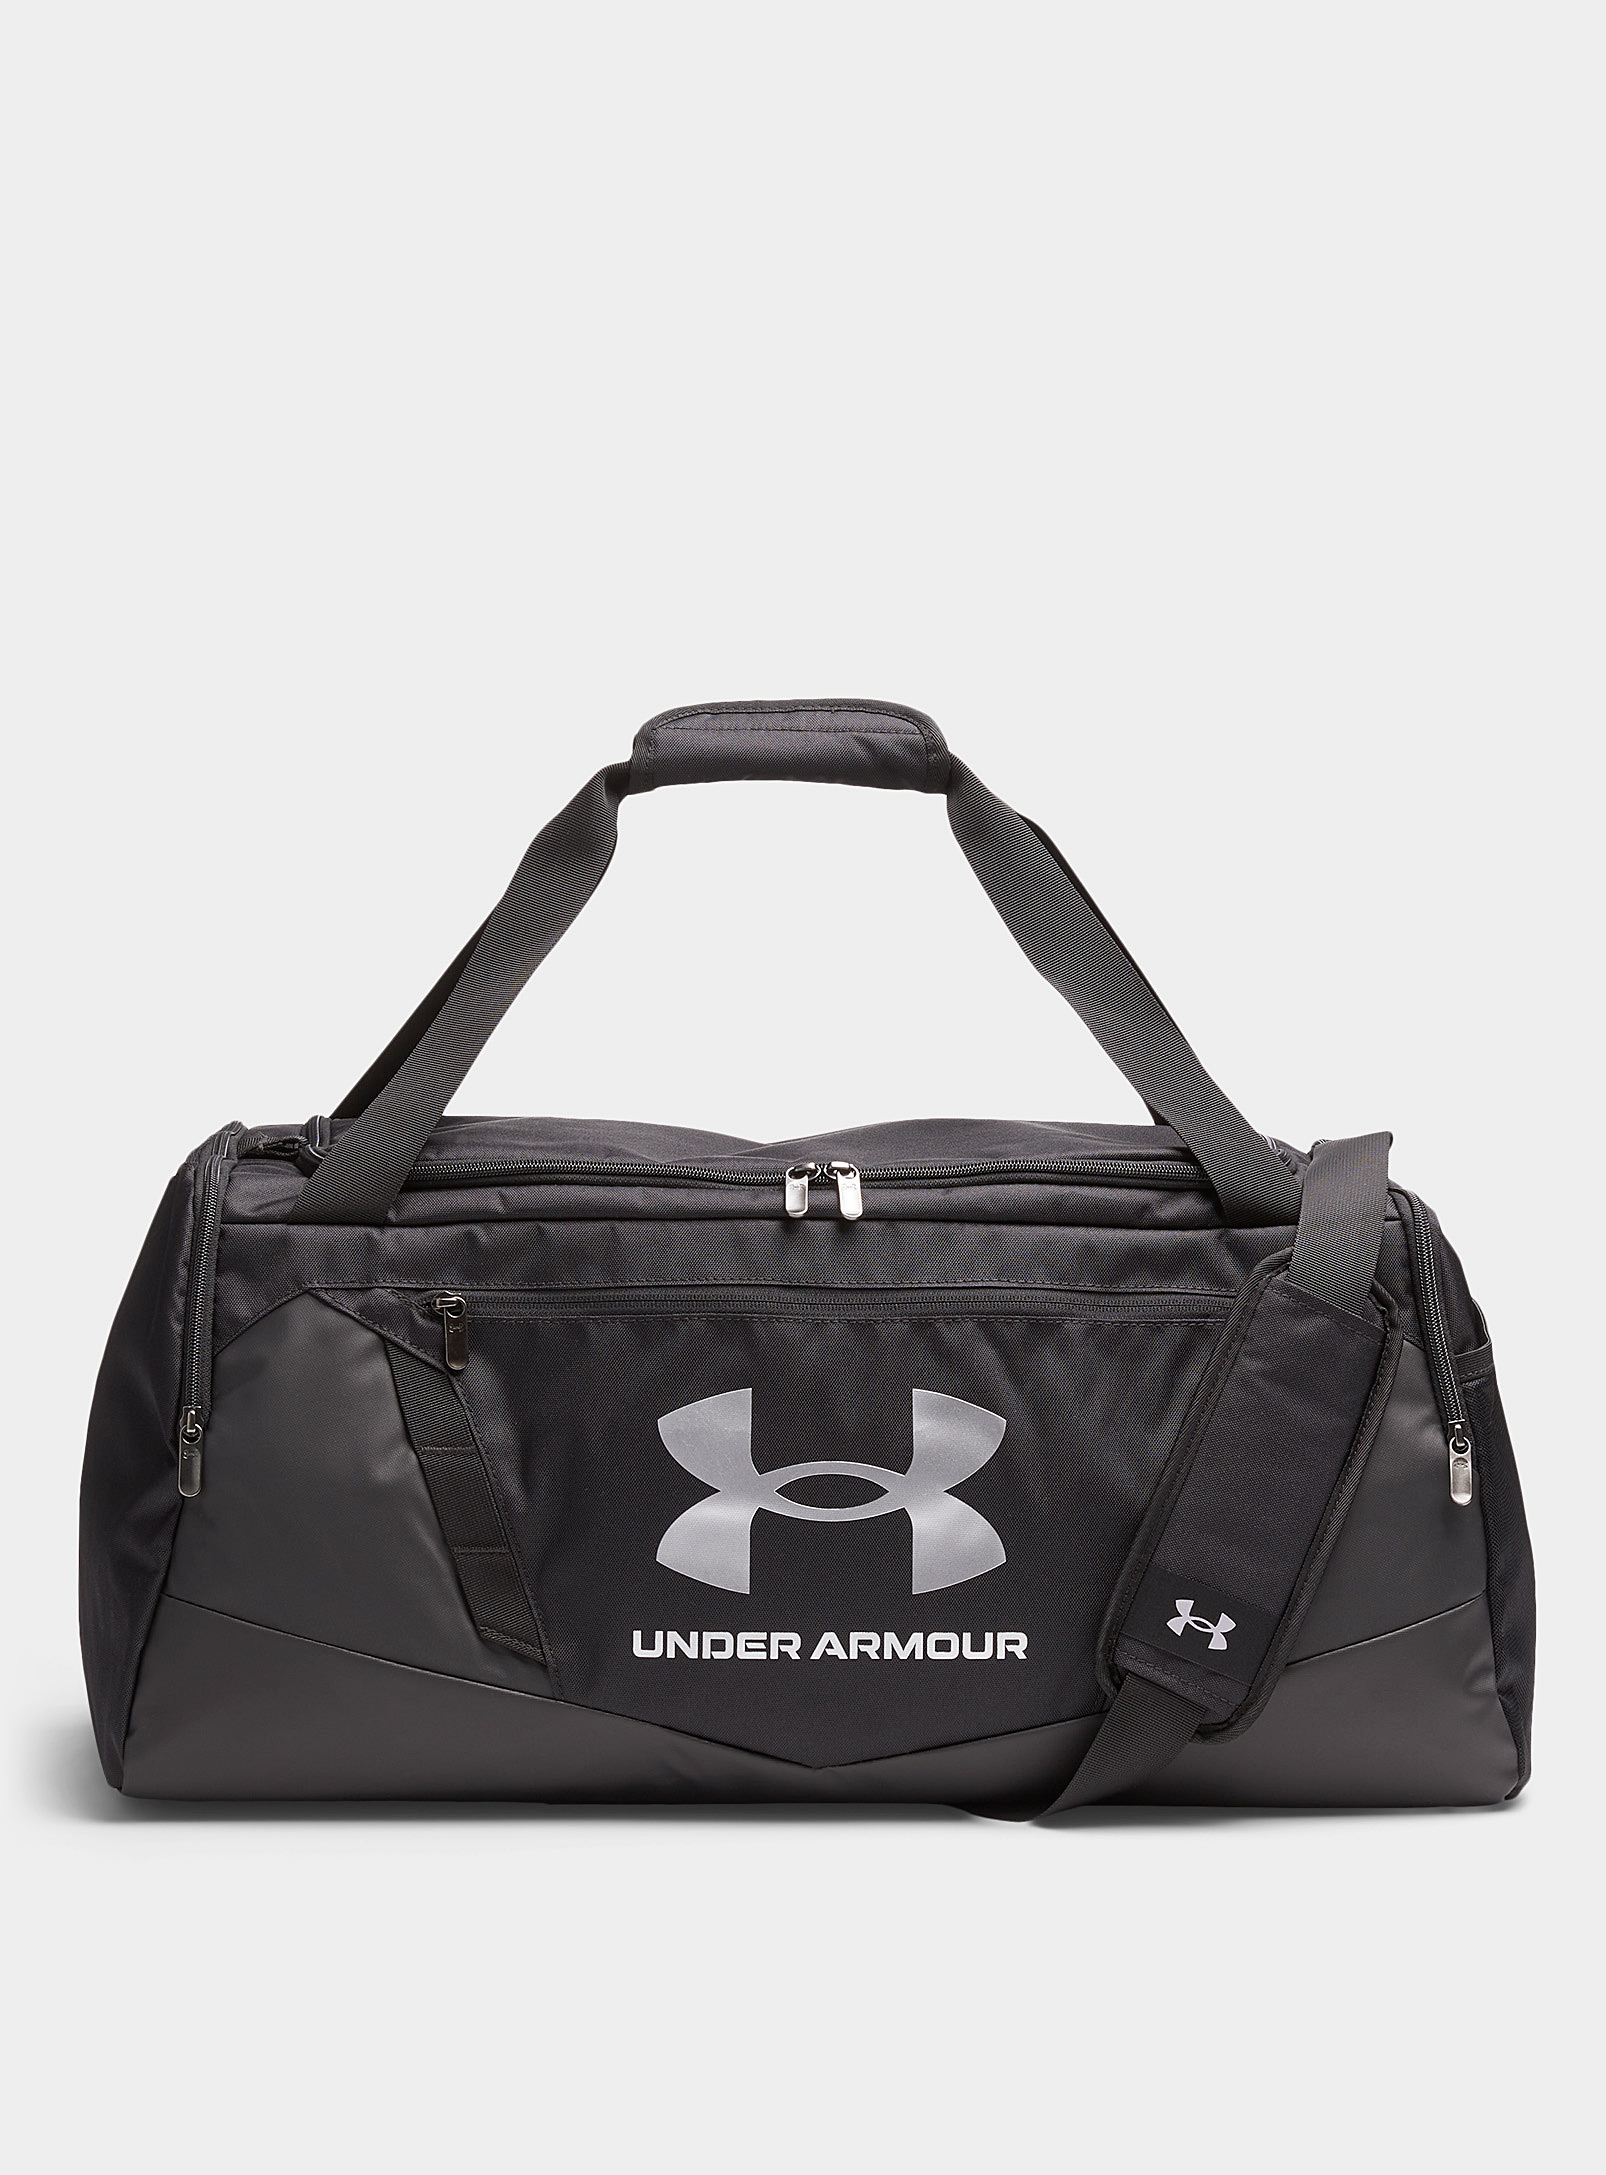 UNDER ARMOUR UNDENIABLE LARGE GYM BAG